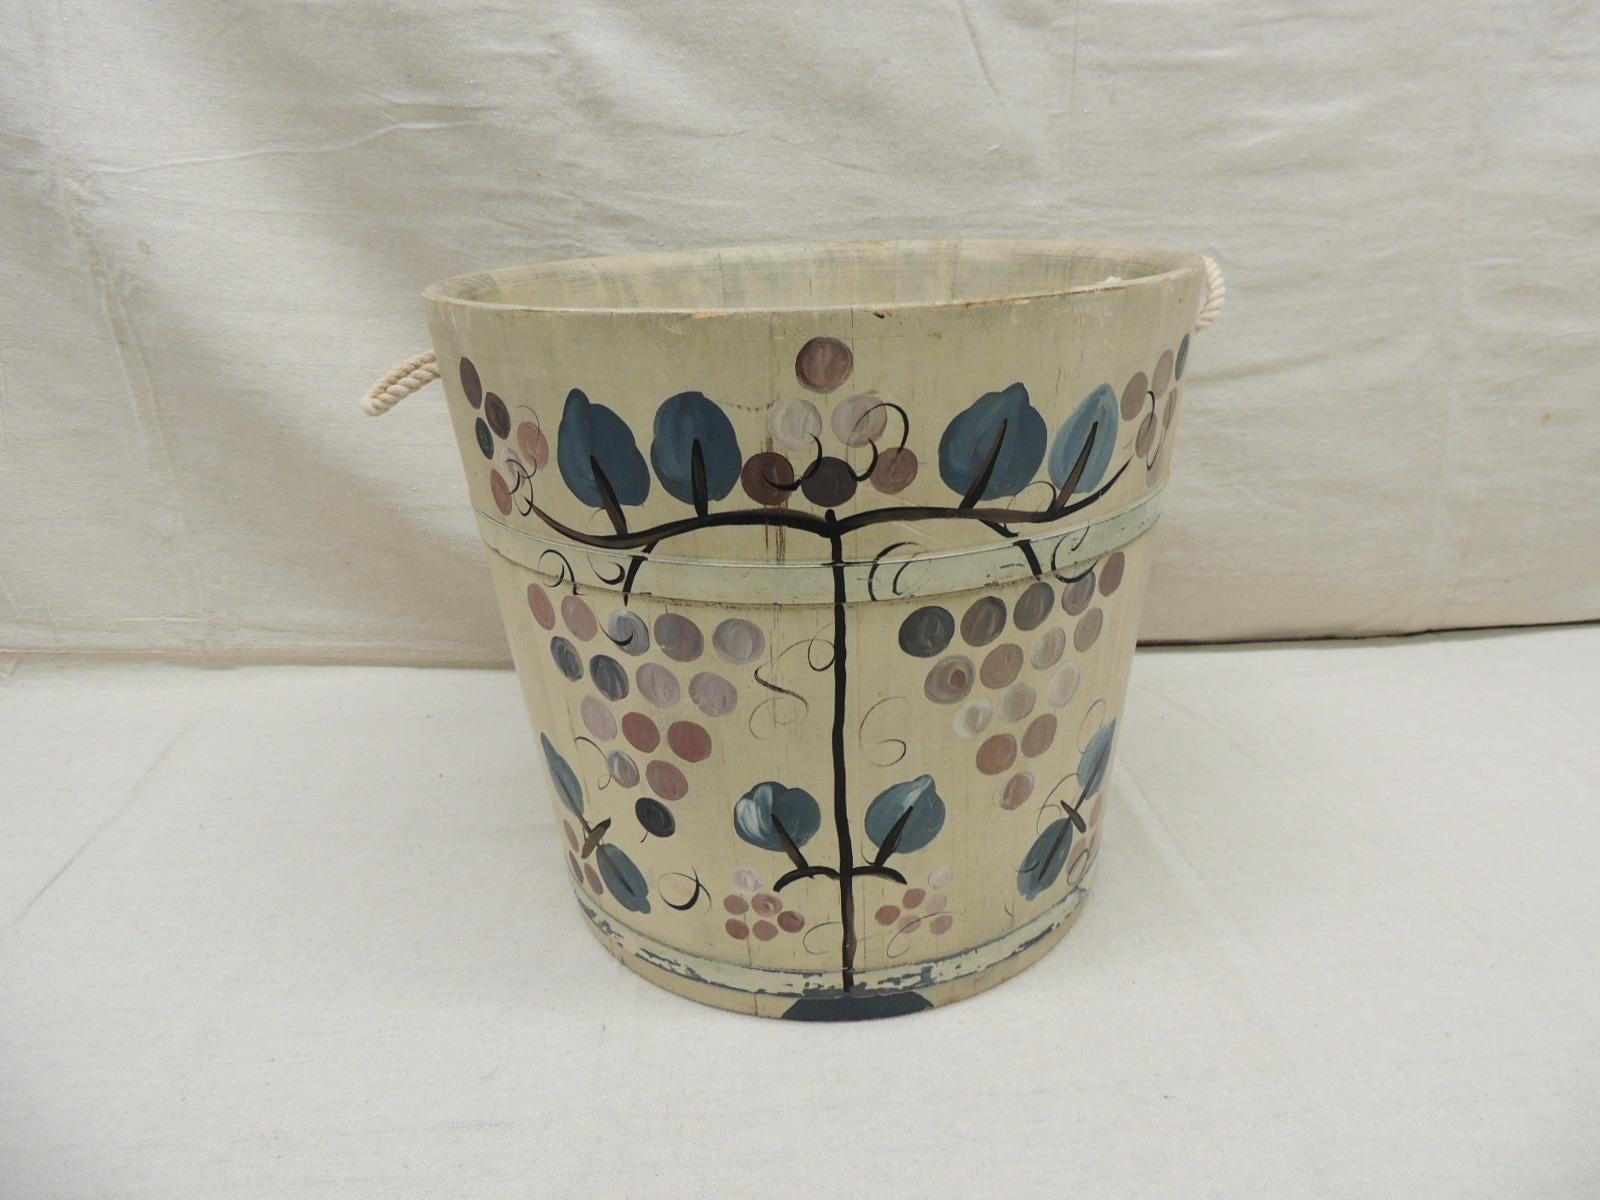 Vintage Handpainted Folk Art Style bucket with ropes handles
Decoration depicts grapes and vines. In shades of tan, green, mauve, and black
USA, 
Wood, metal, paint and twine rope
Ideal as a wastebasket, magazine rack, fireplace log holders
Folk art